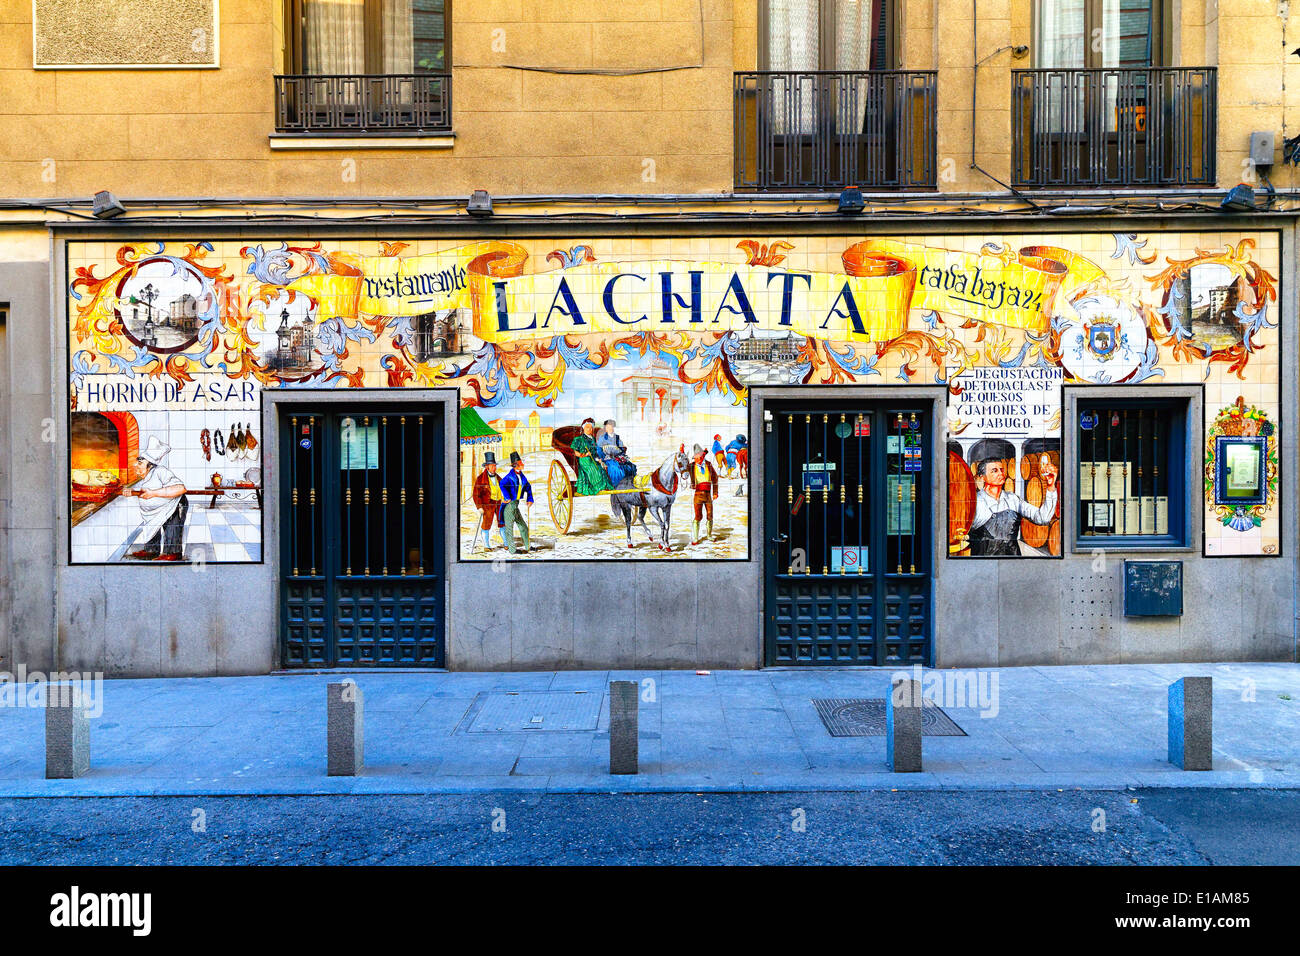 Entrance View of a Tapas Restaurant La Chata with Ornamental Tile Facade, Madrid, Spain Stock Photo